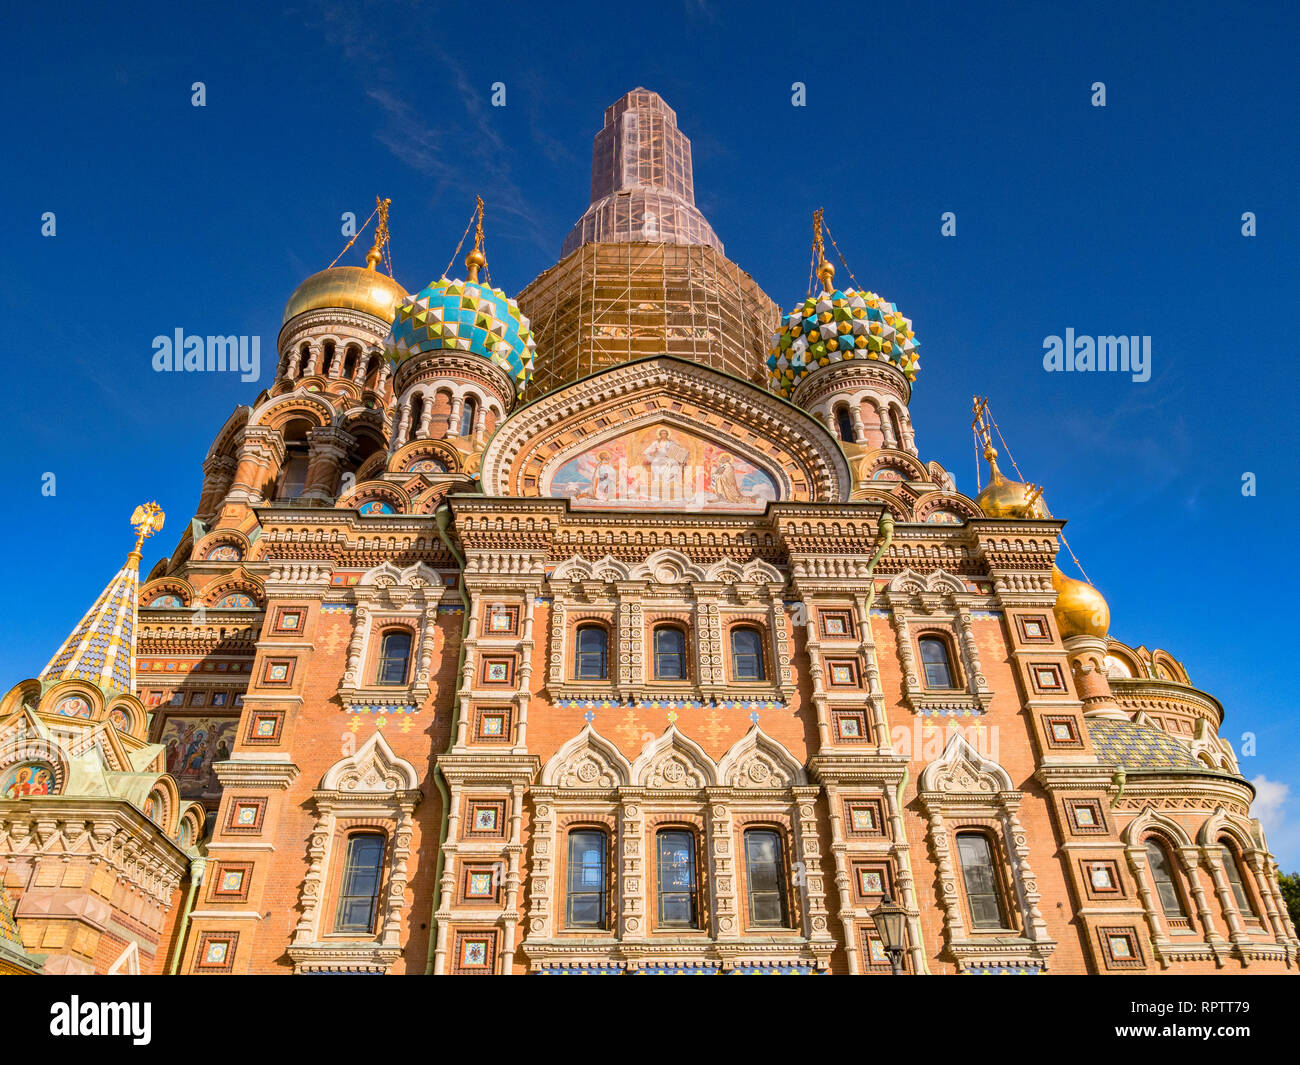 18 September 2018: St Petersburg, Russia - Church of the Saviour on Spilled Blood, so called because it was erected on the spot where Tsar Alexander I Stock Photo